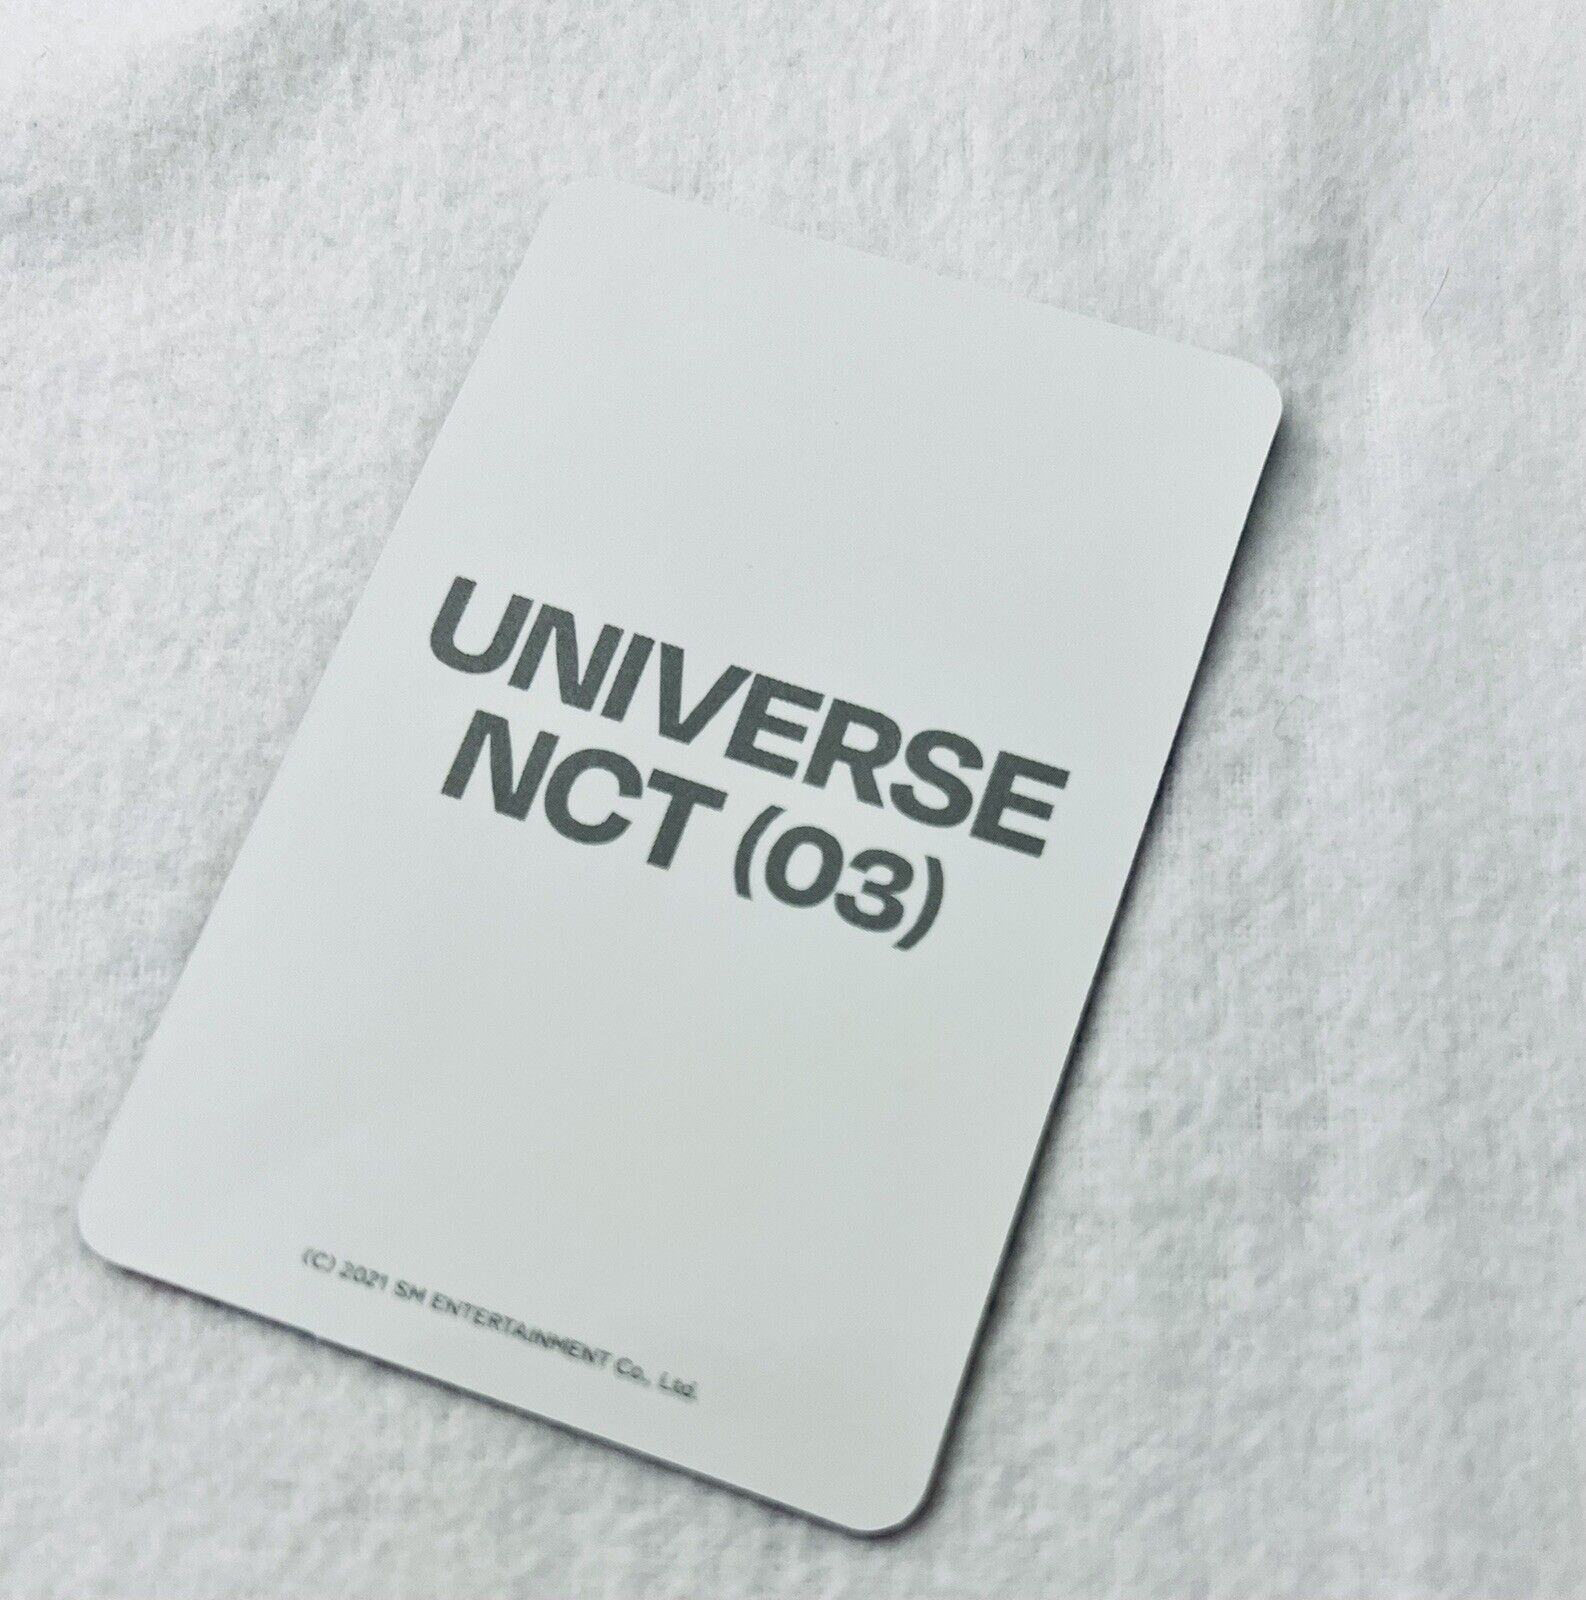 [MARK] NCT 2021 Universe SMTown Official MD Goods Photocard - NCT 127 DREAM Без бренда - фотография #2